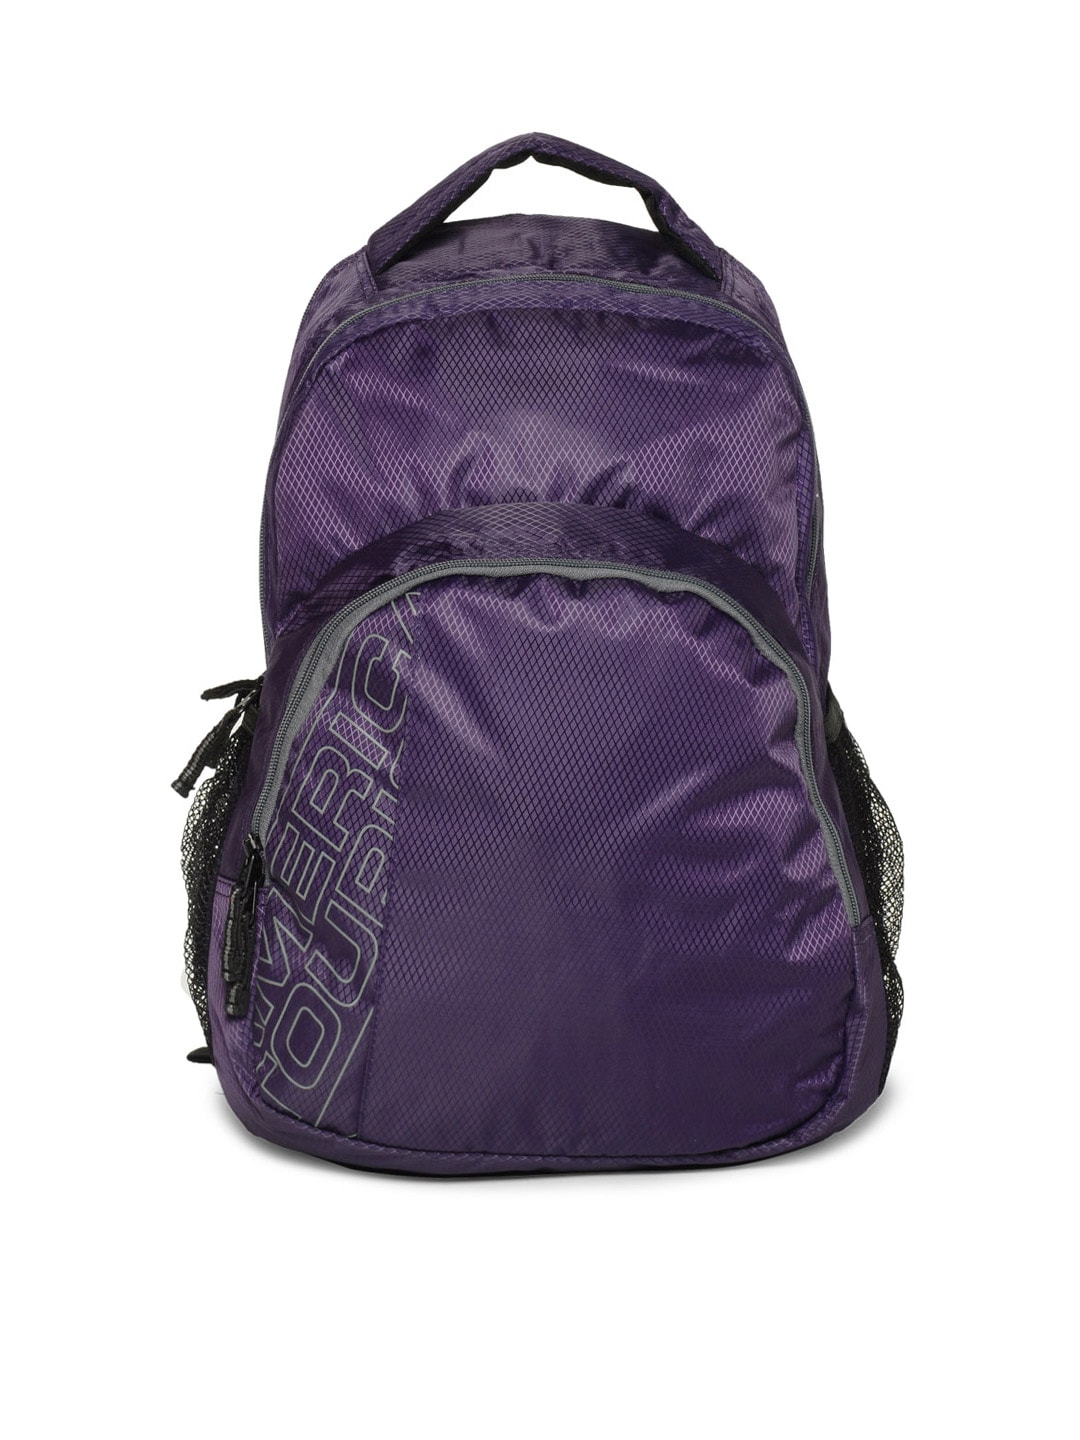 American Tourister Unisex Purple Backpack